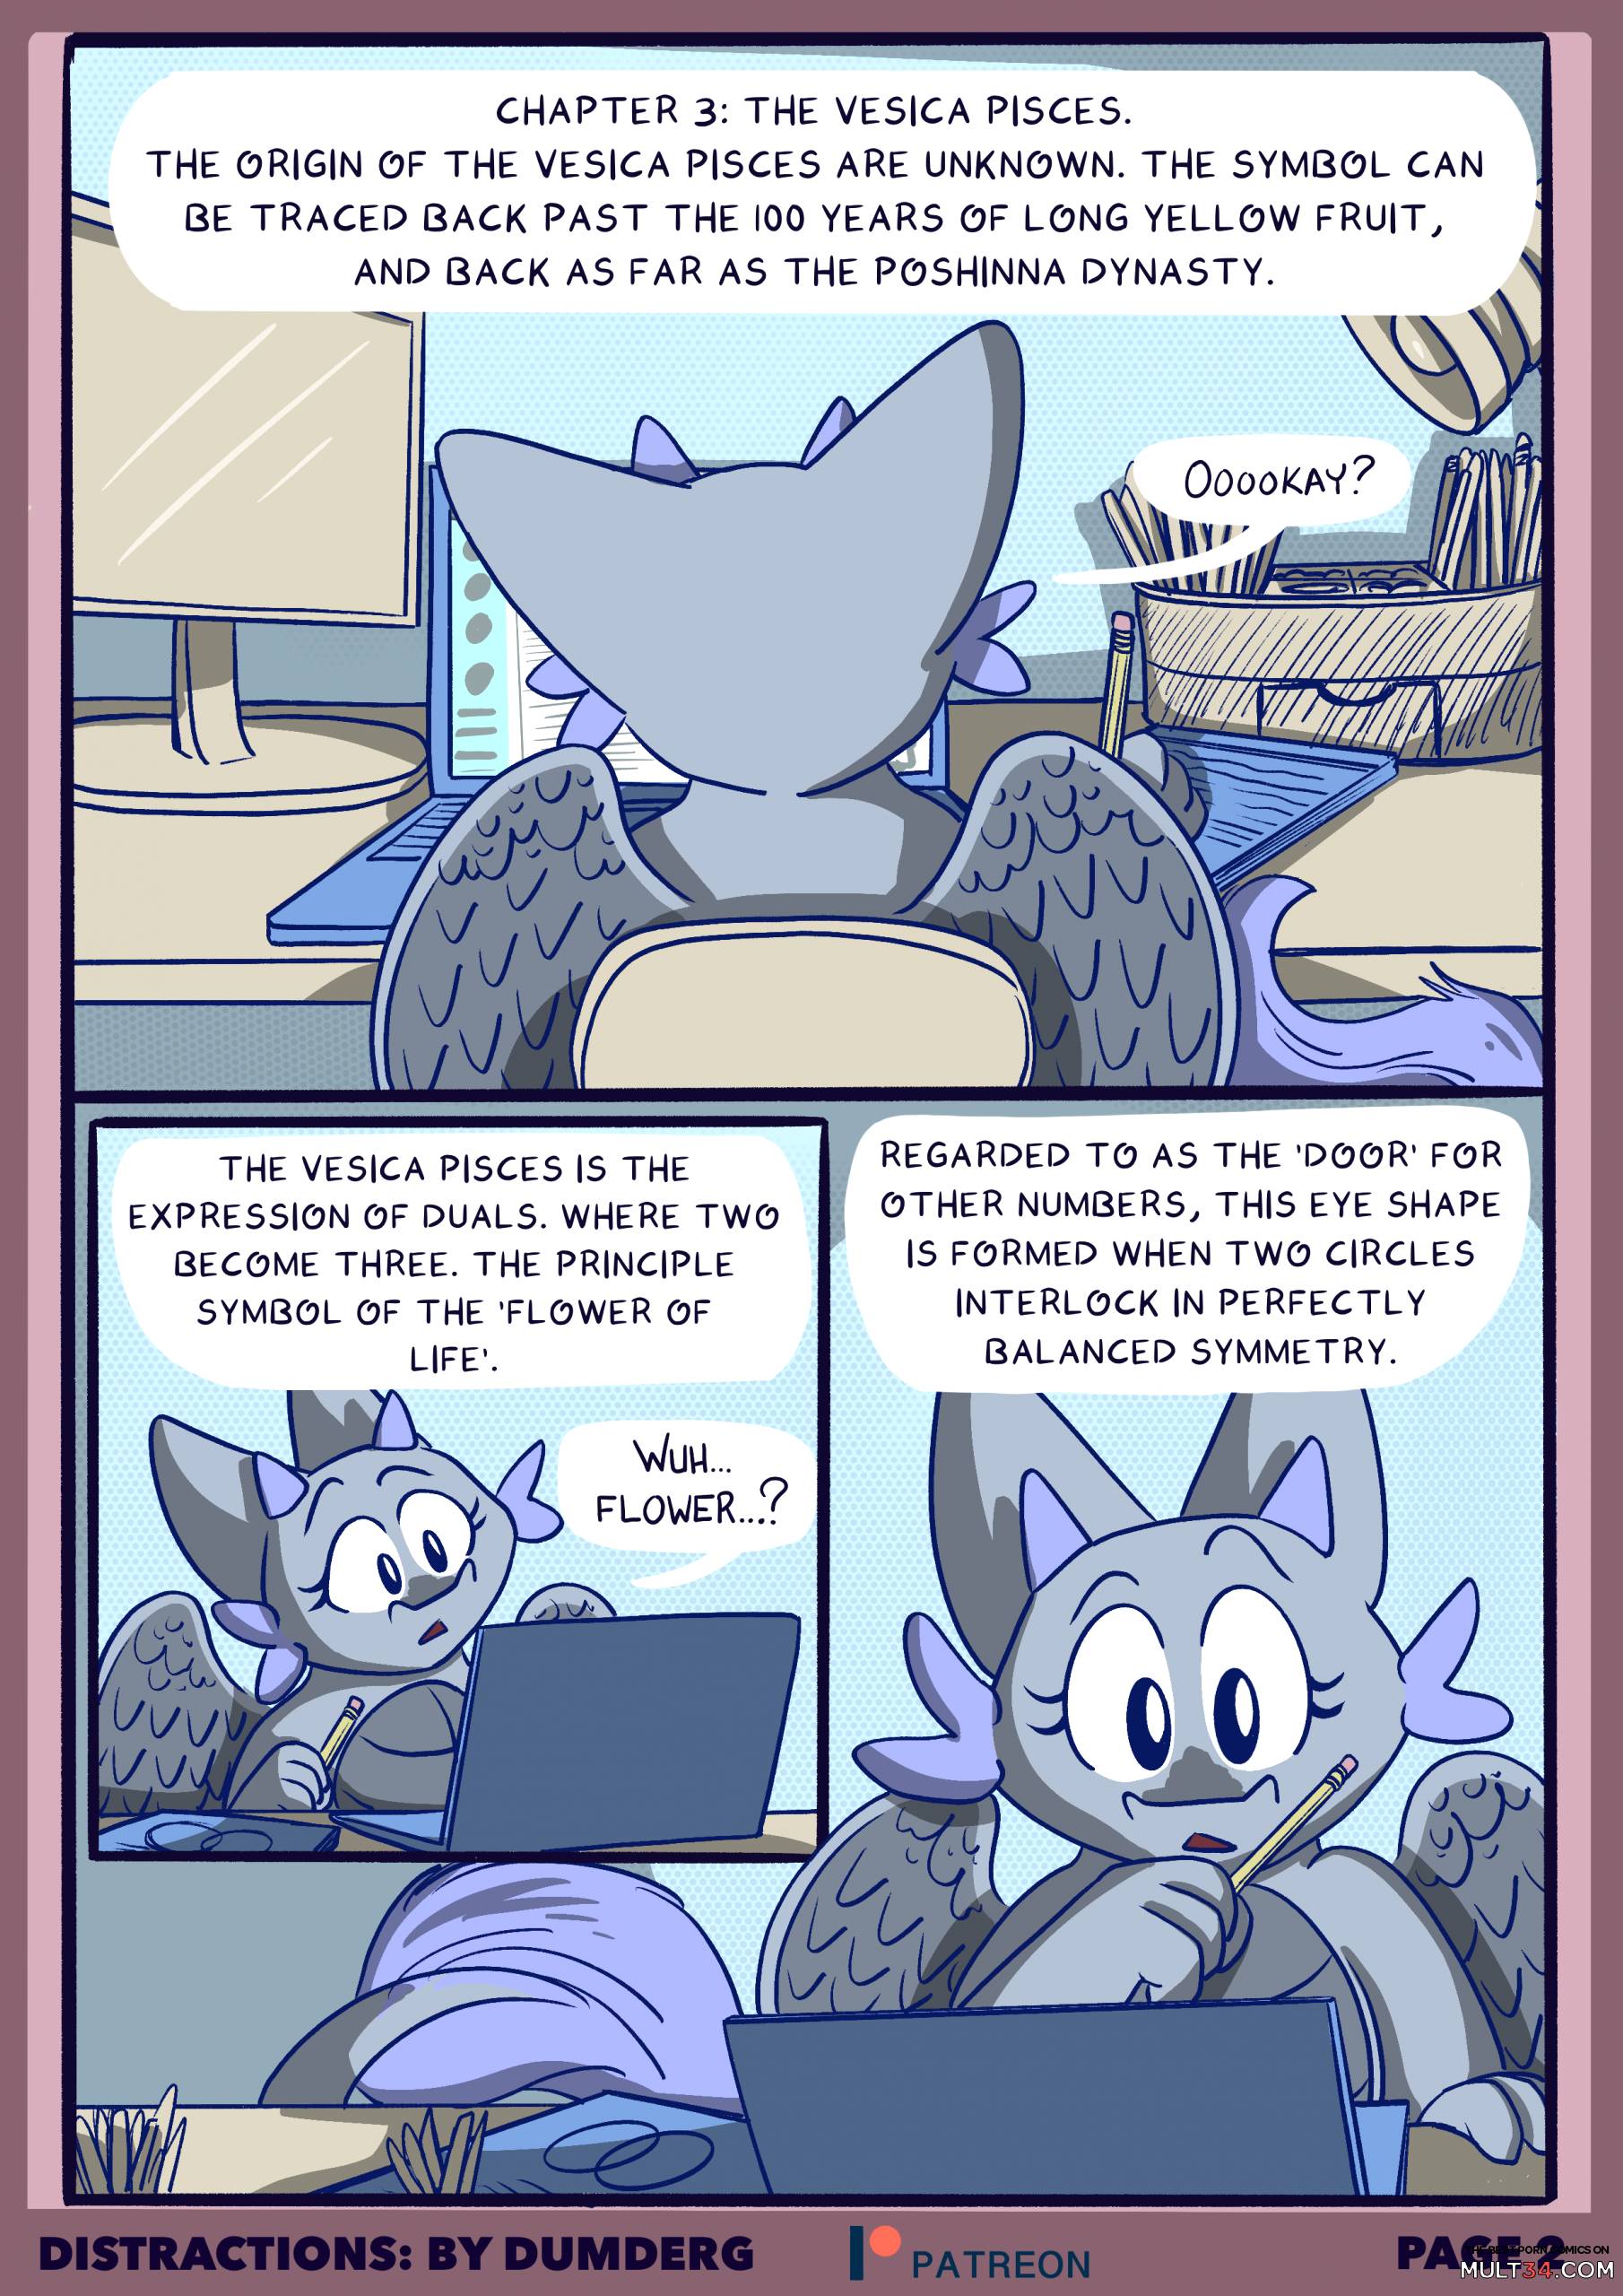 Distractions - DumDerg page 3